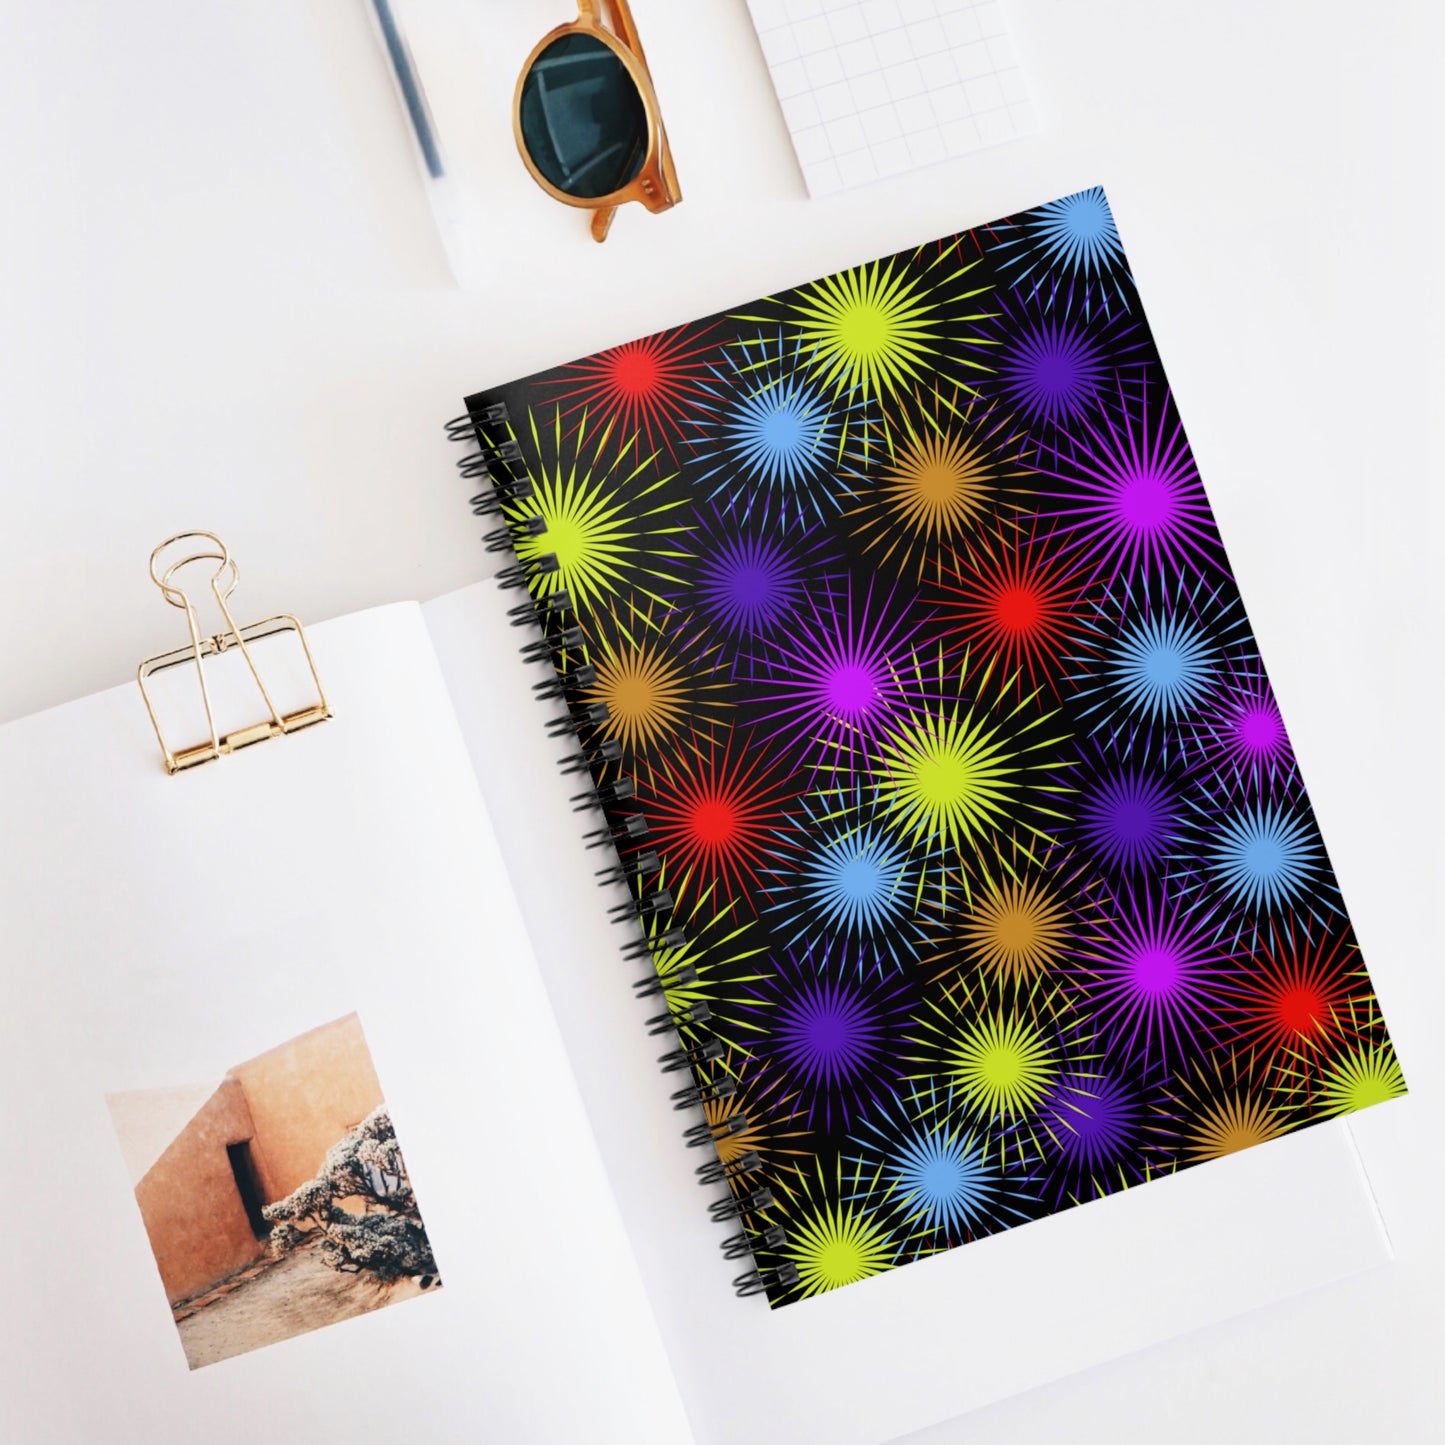 Starburst Fireworks: Spiral Notebook - Log Books - Journals - Diaries - and More Custom Printed by TheGlassyLass